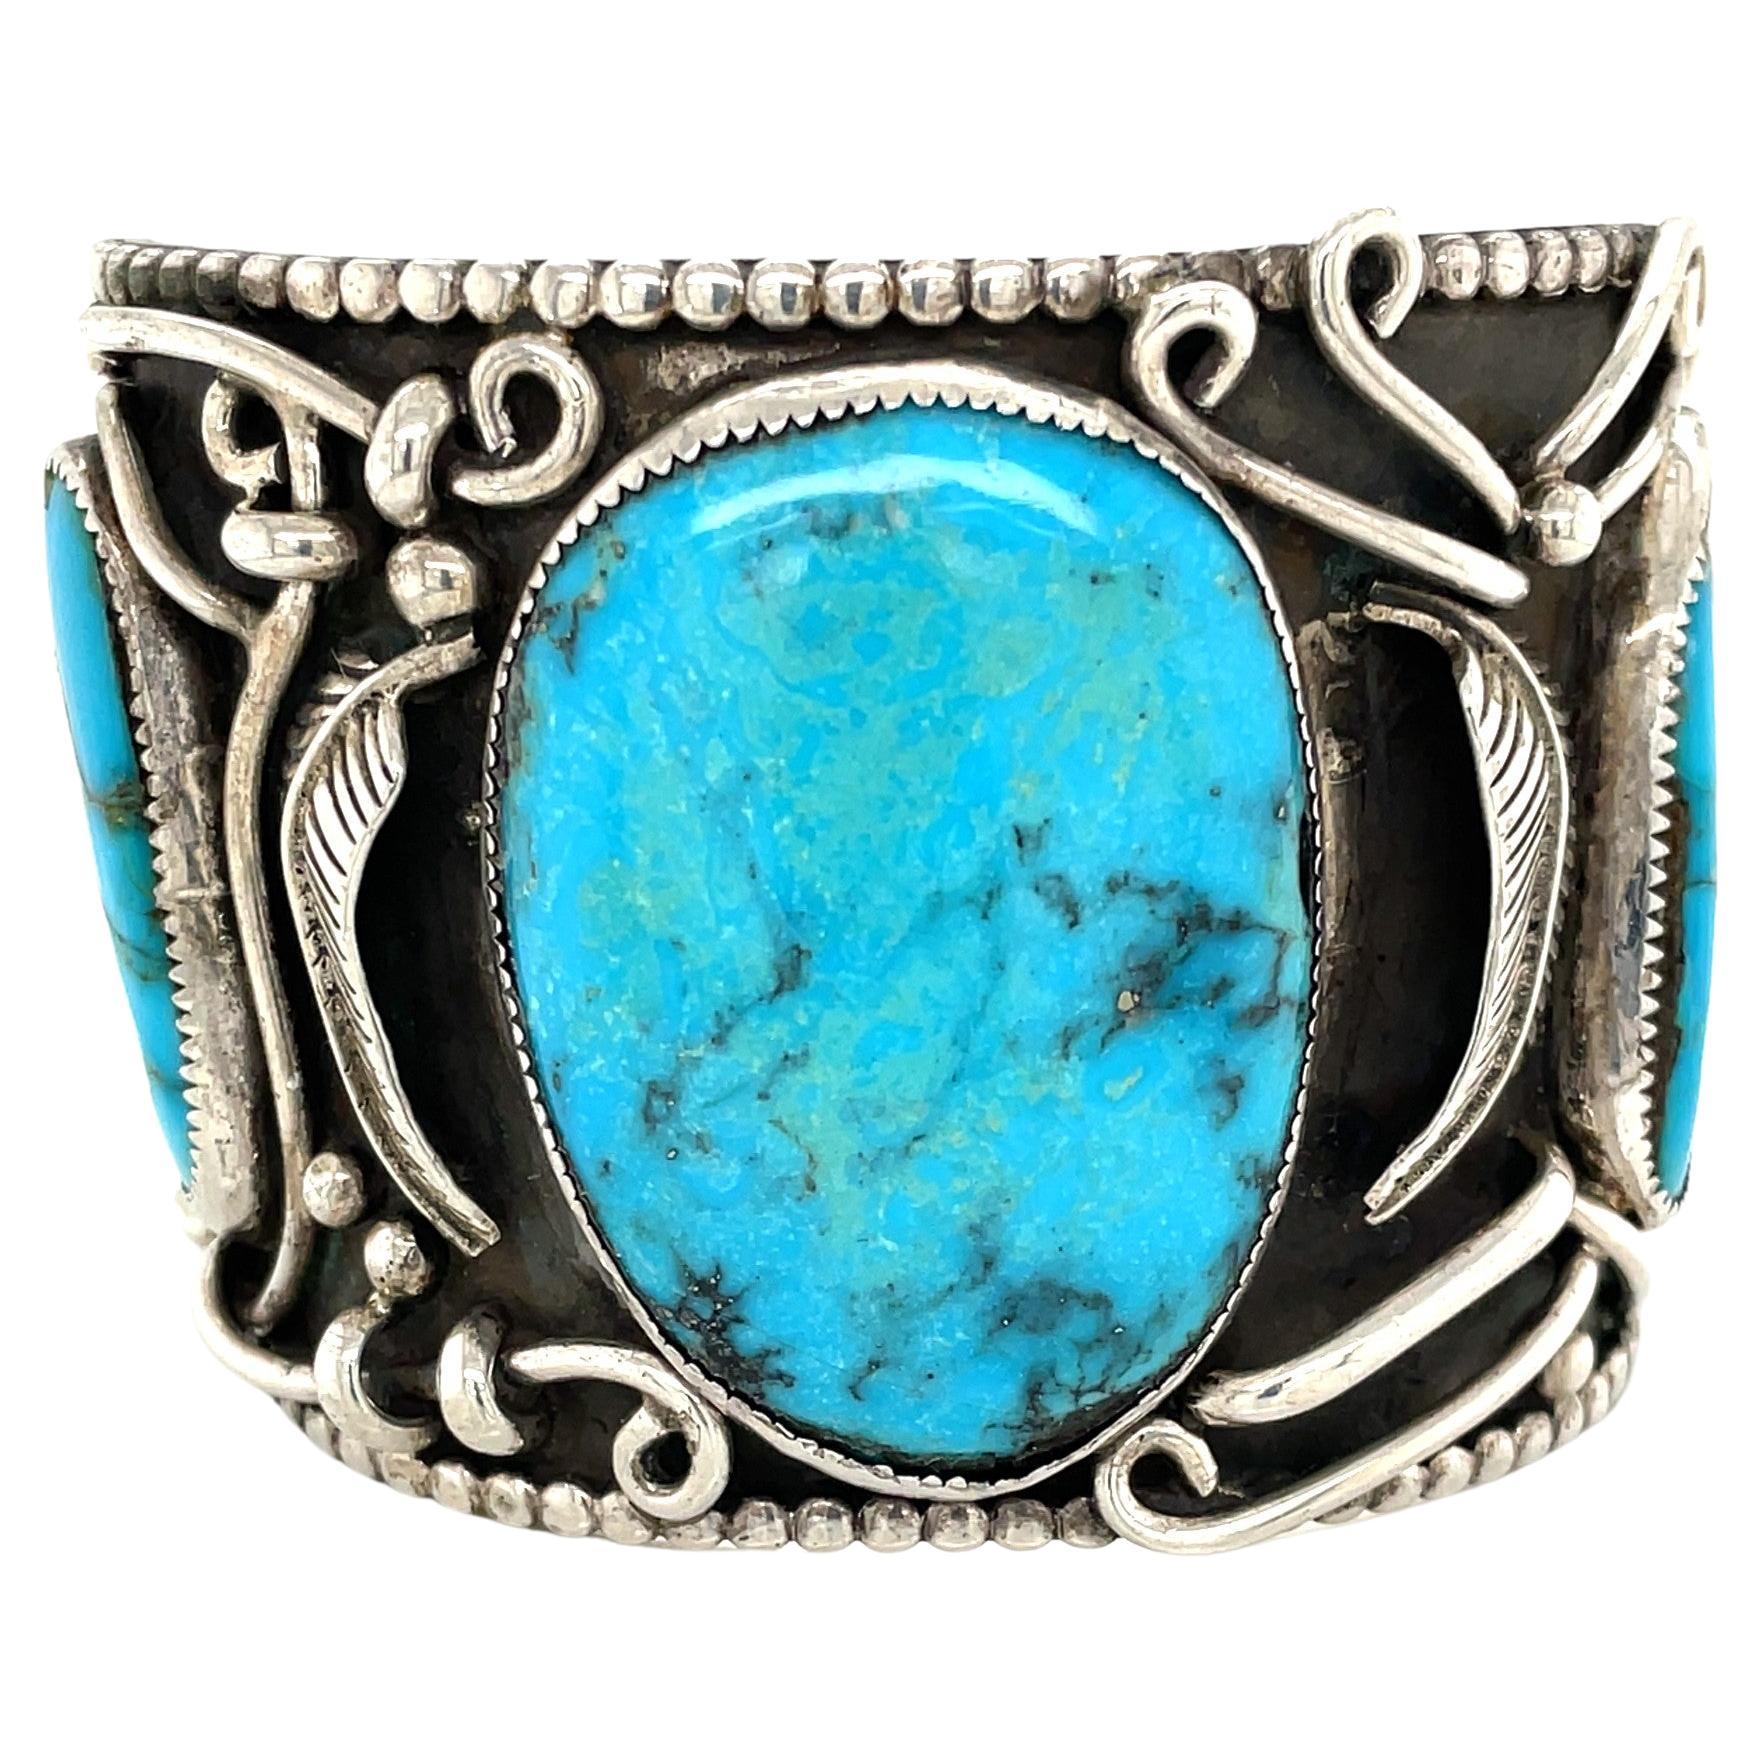 Native American Turquoise Sterling Silver Cuff Bracelet